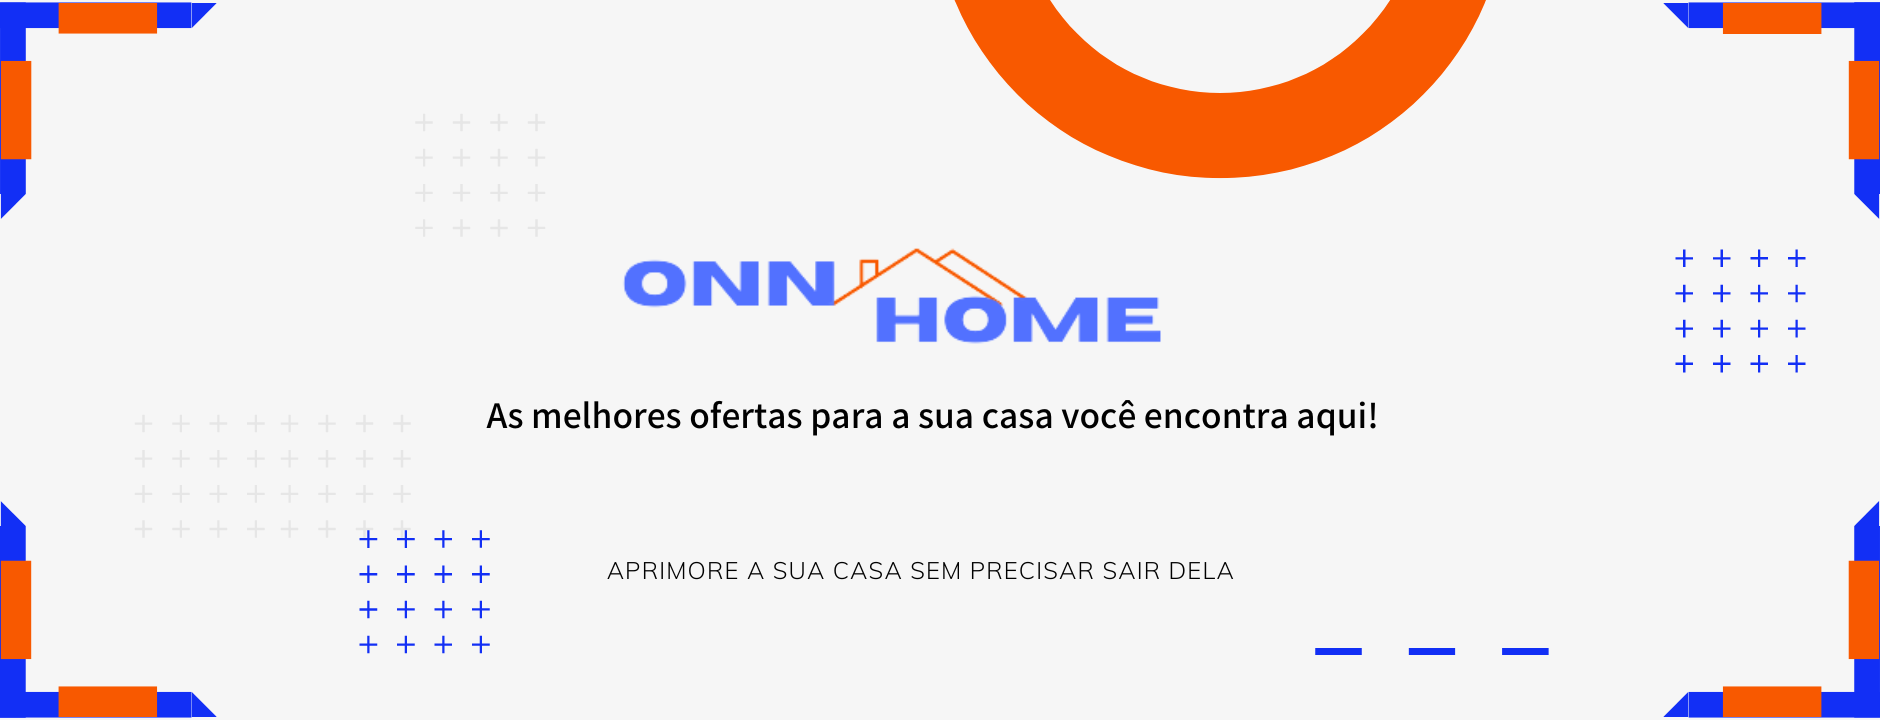 onnhome